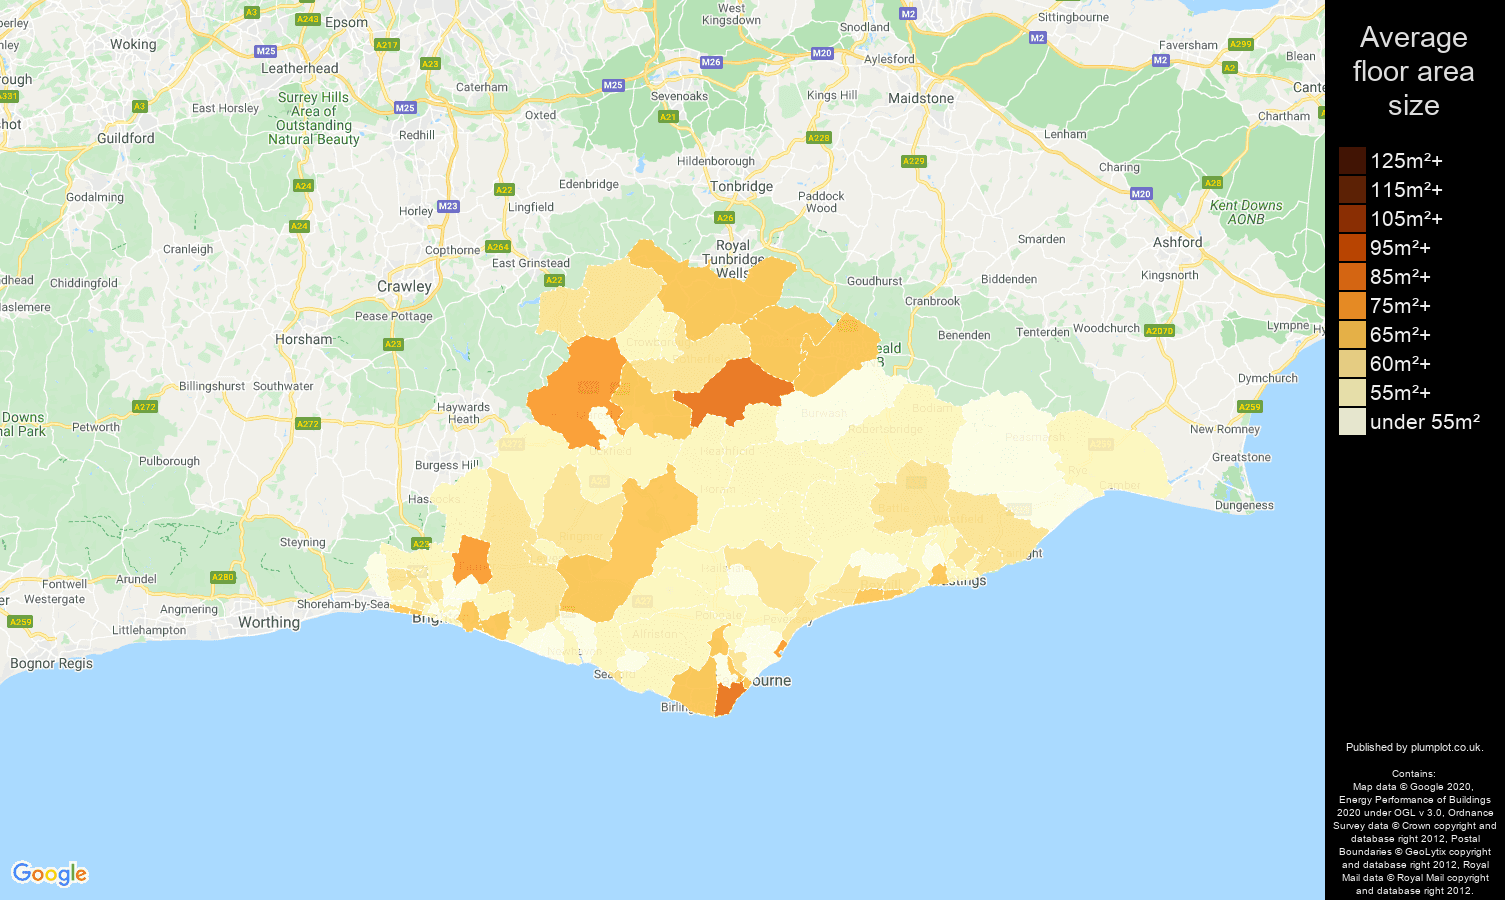 East Sussex map of average floor area size of flats